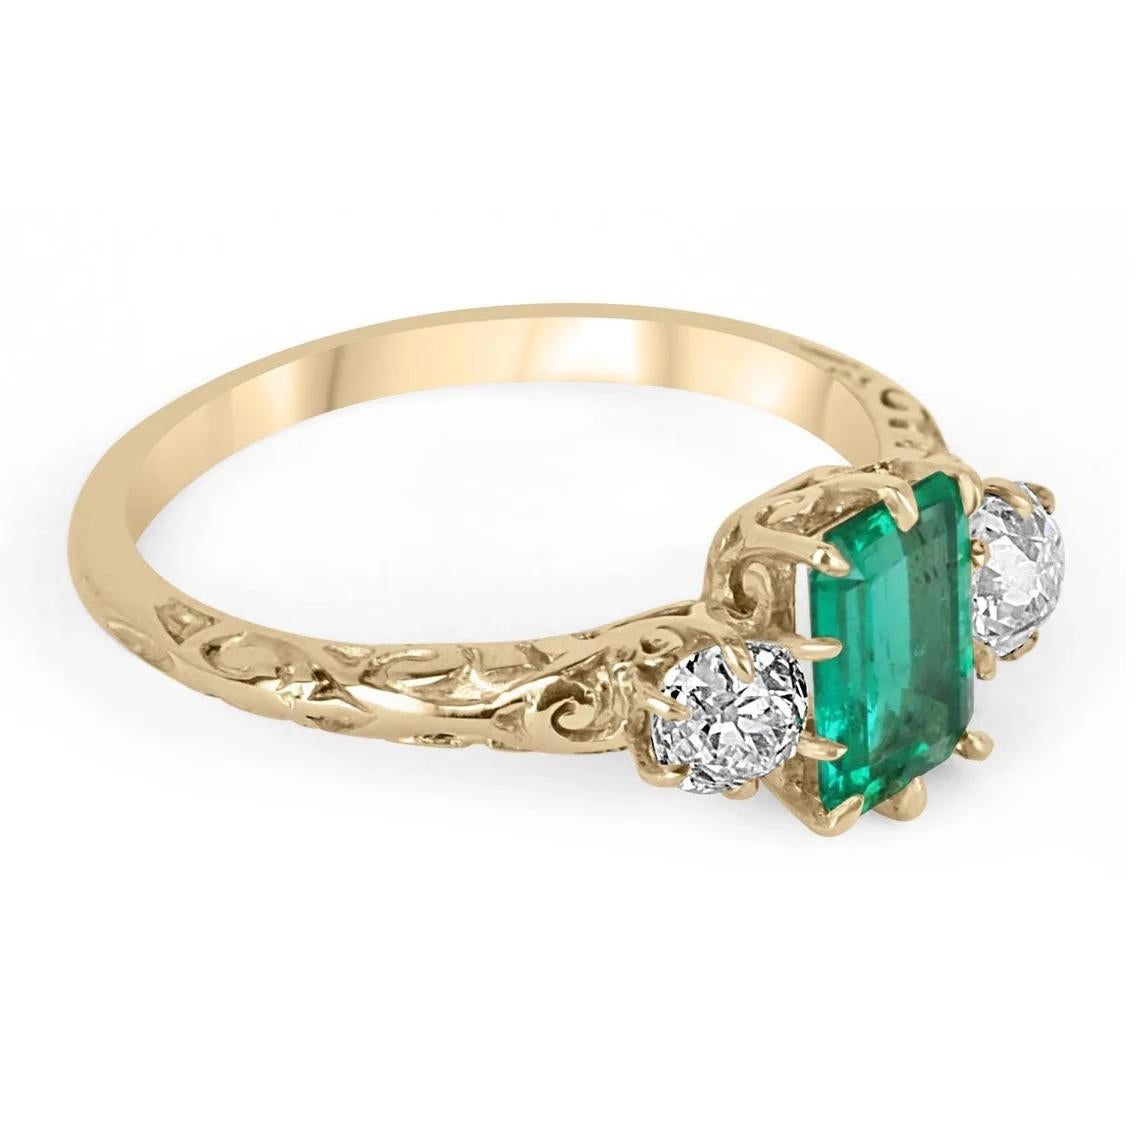 A rare find, a Top Colombian emerald and old European cut diamond three stone. An extraordinary, Victorian-inspired ring. Dexterously hand crafted in gleaming 18K yellow, this ring features a high quality, 1.0-carat natural Colombian emerald,